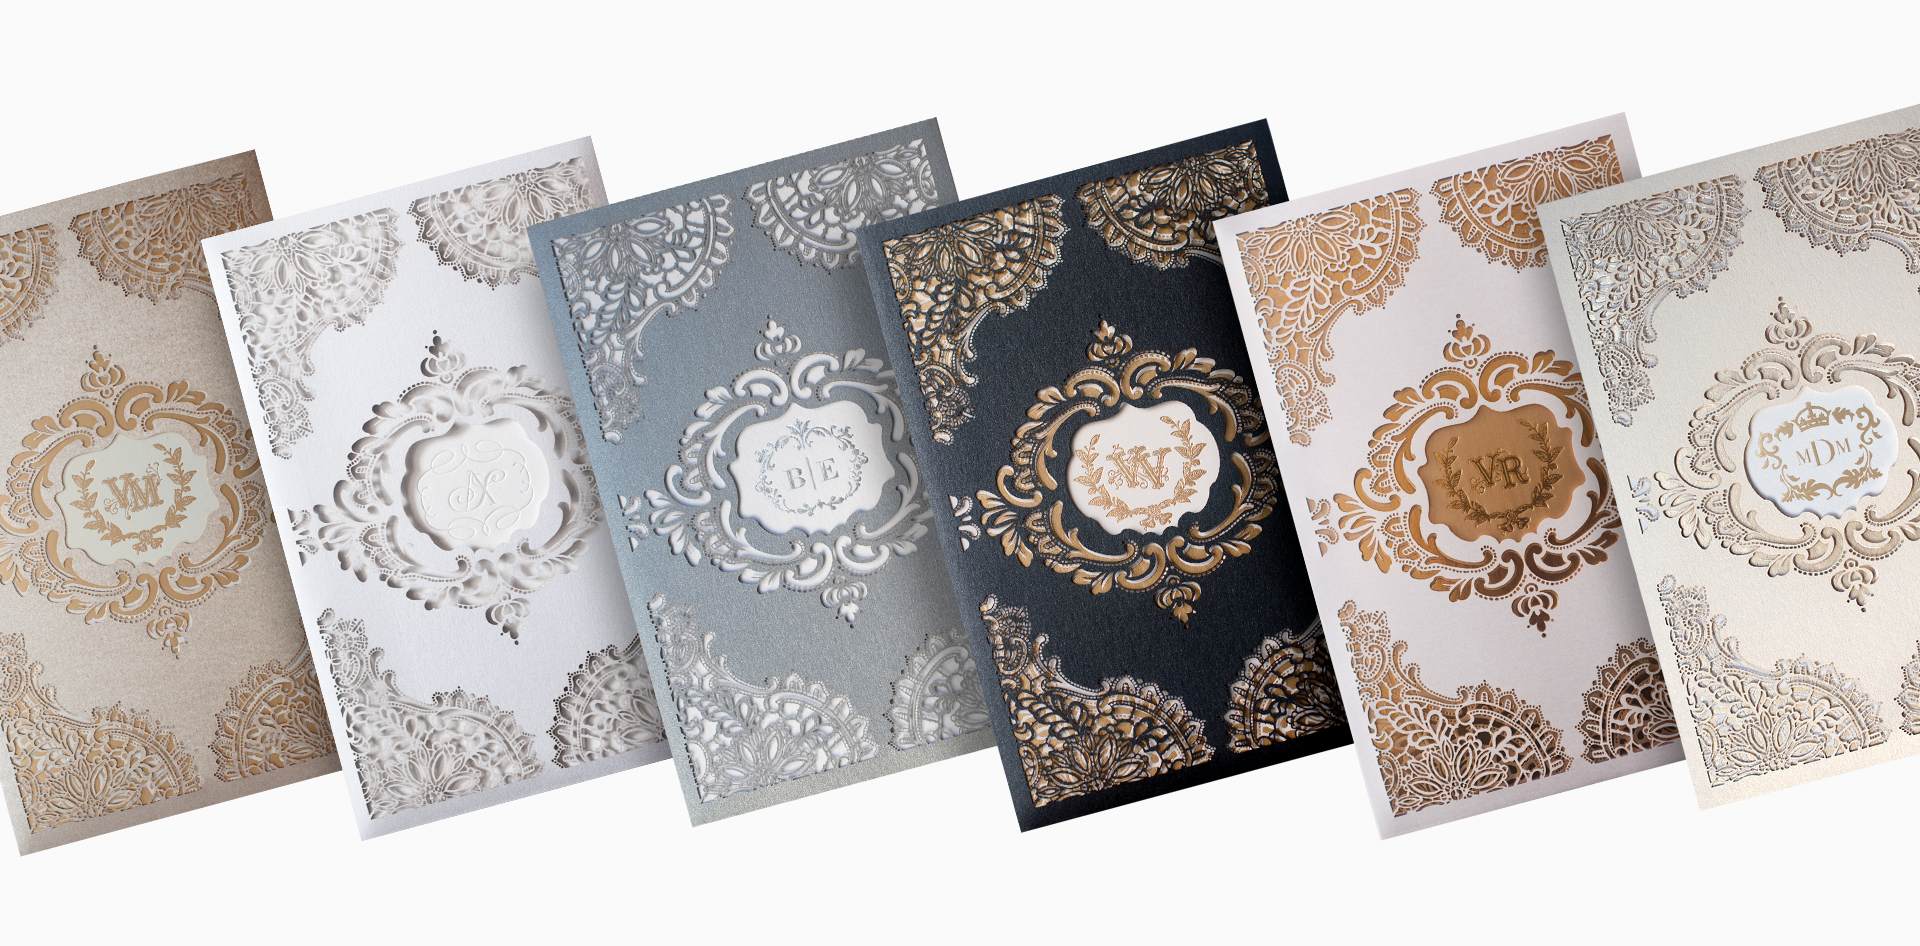 Laser cut lace wedding invitations in multiple colors